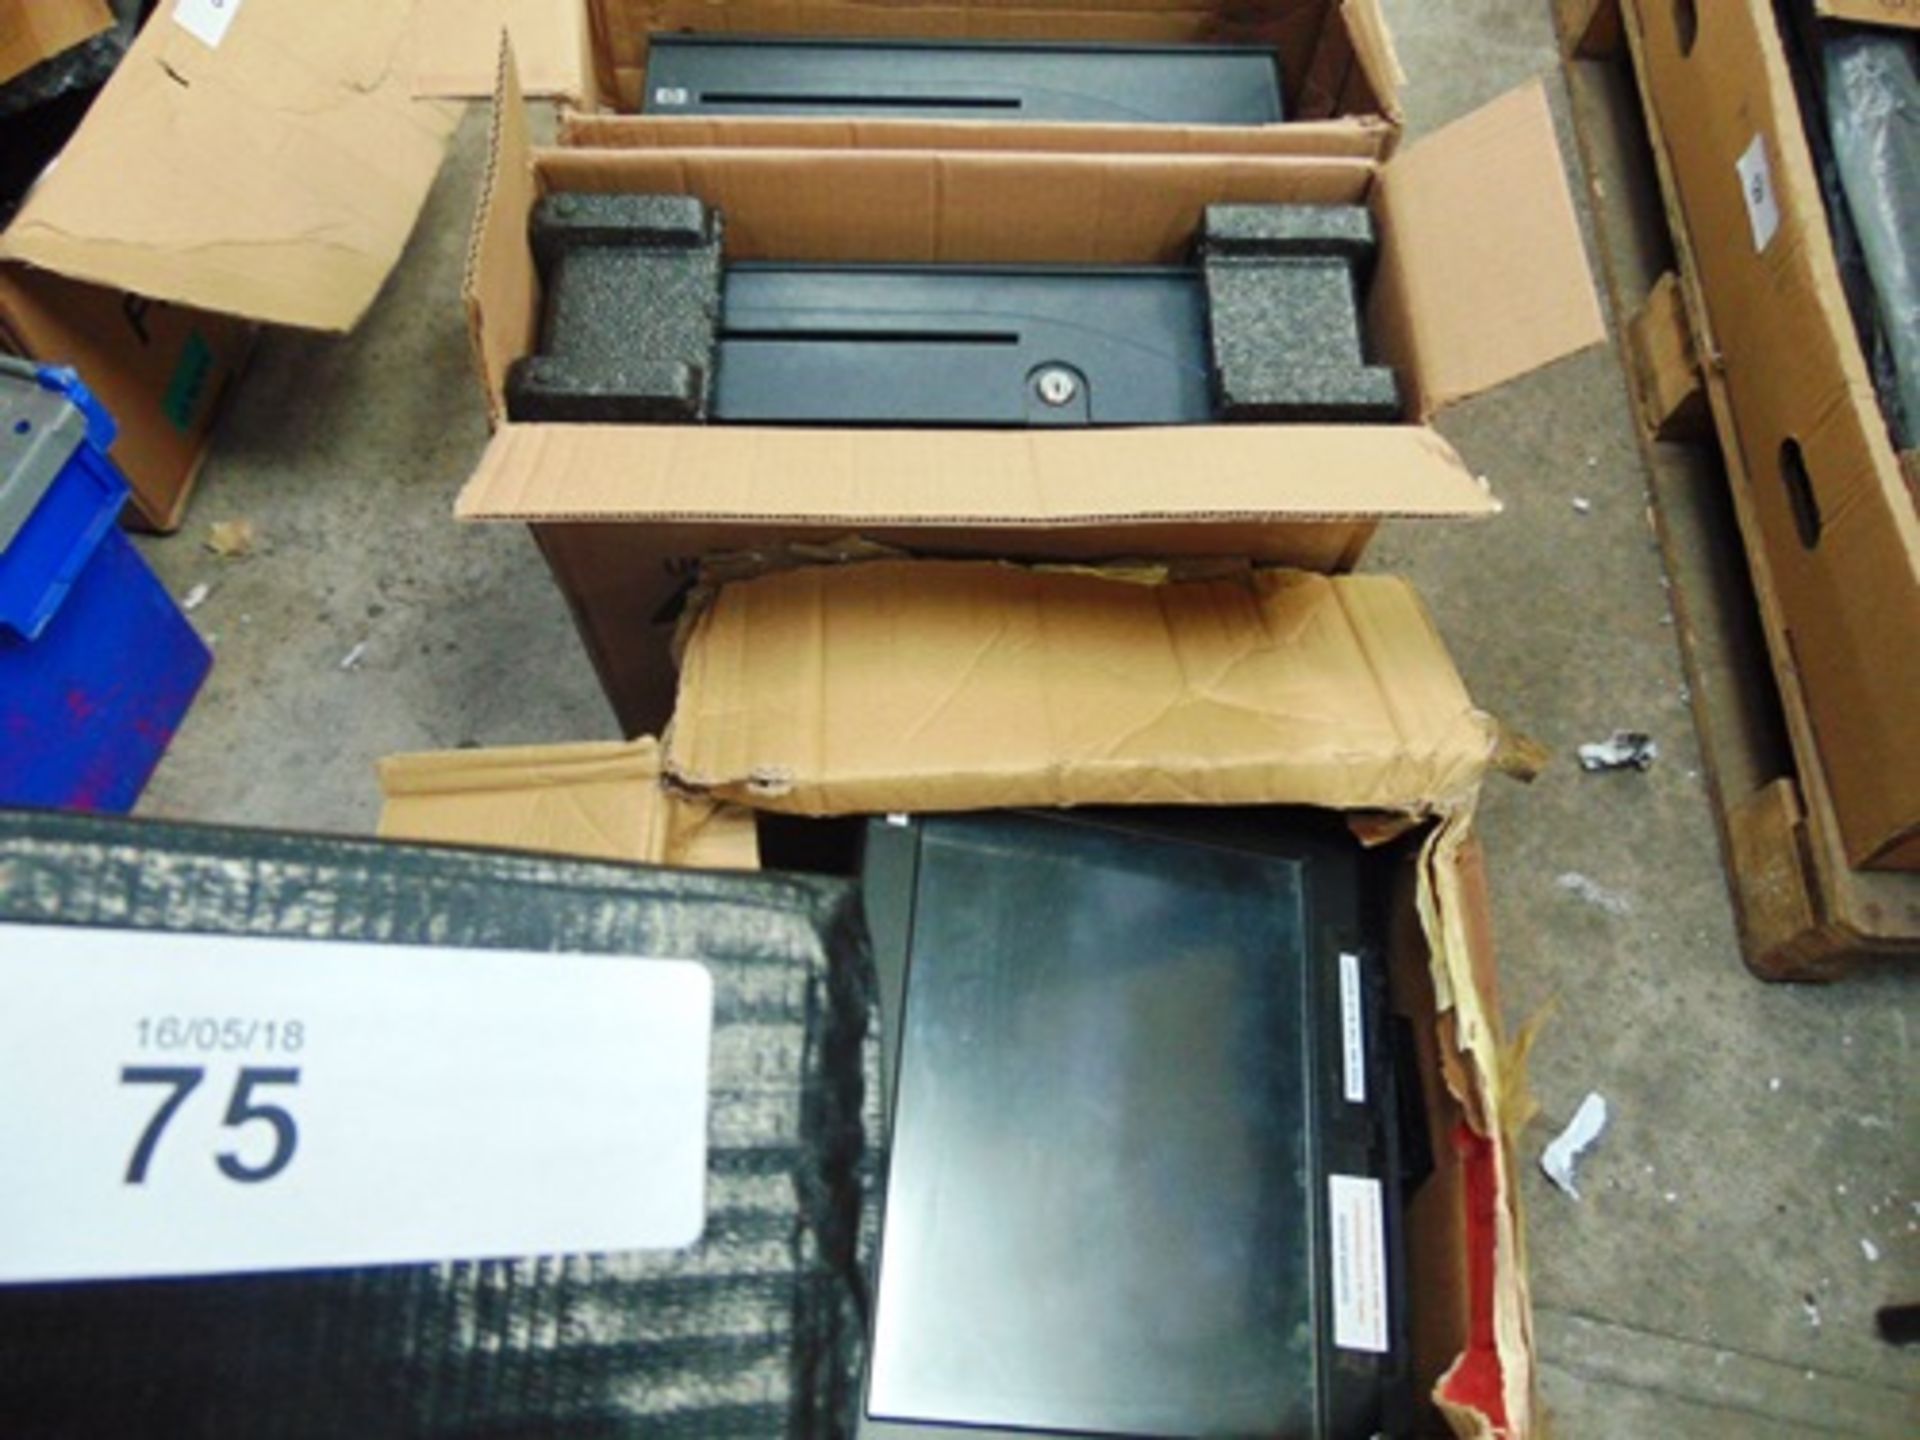 2 x second-hand till drawers together with an HP till screen, untested - Spares and repairs (B3)